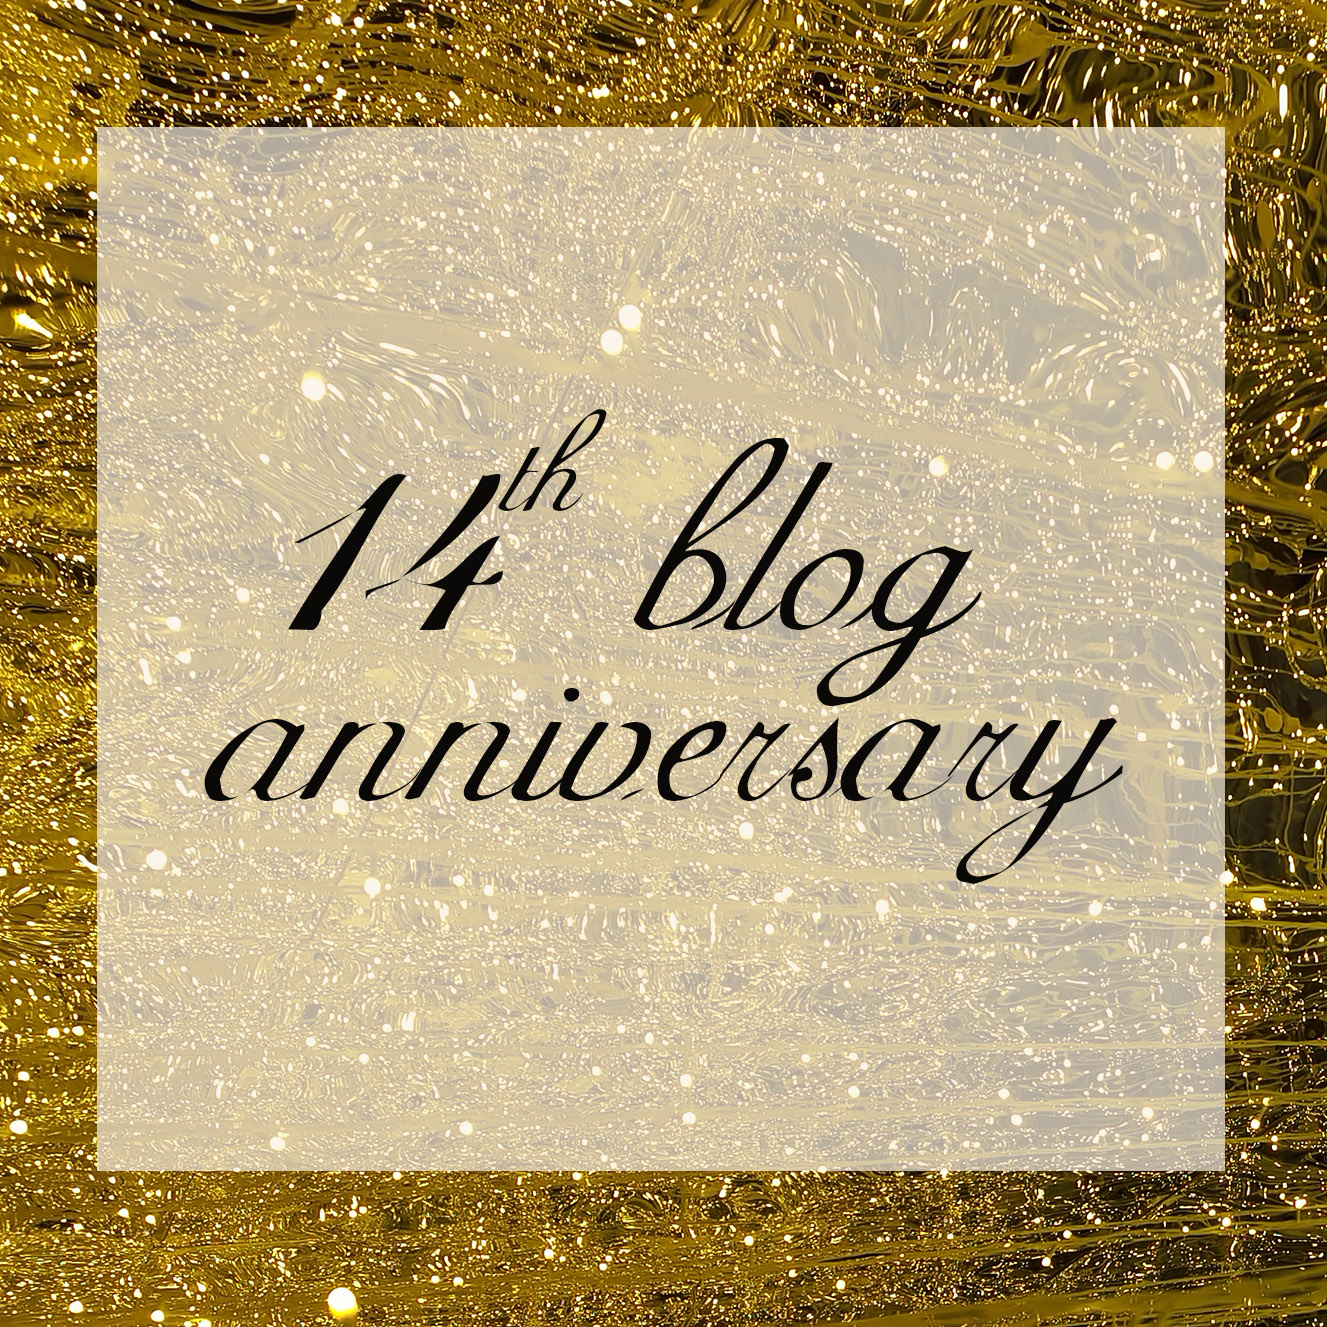 14th Blog anniversary and Ivory